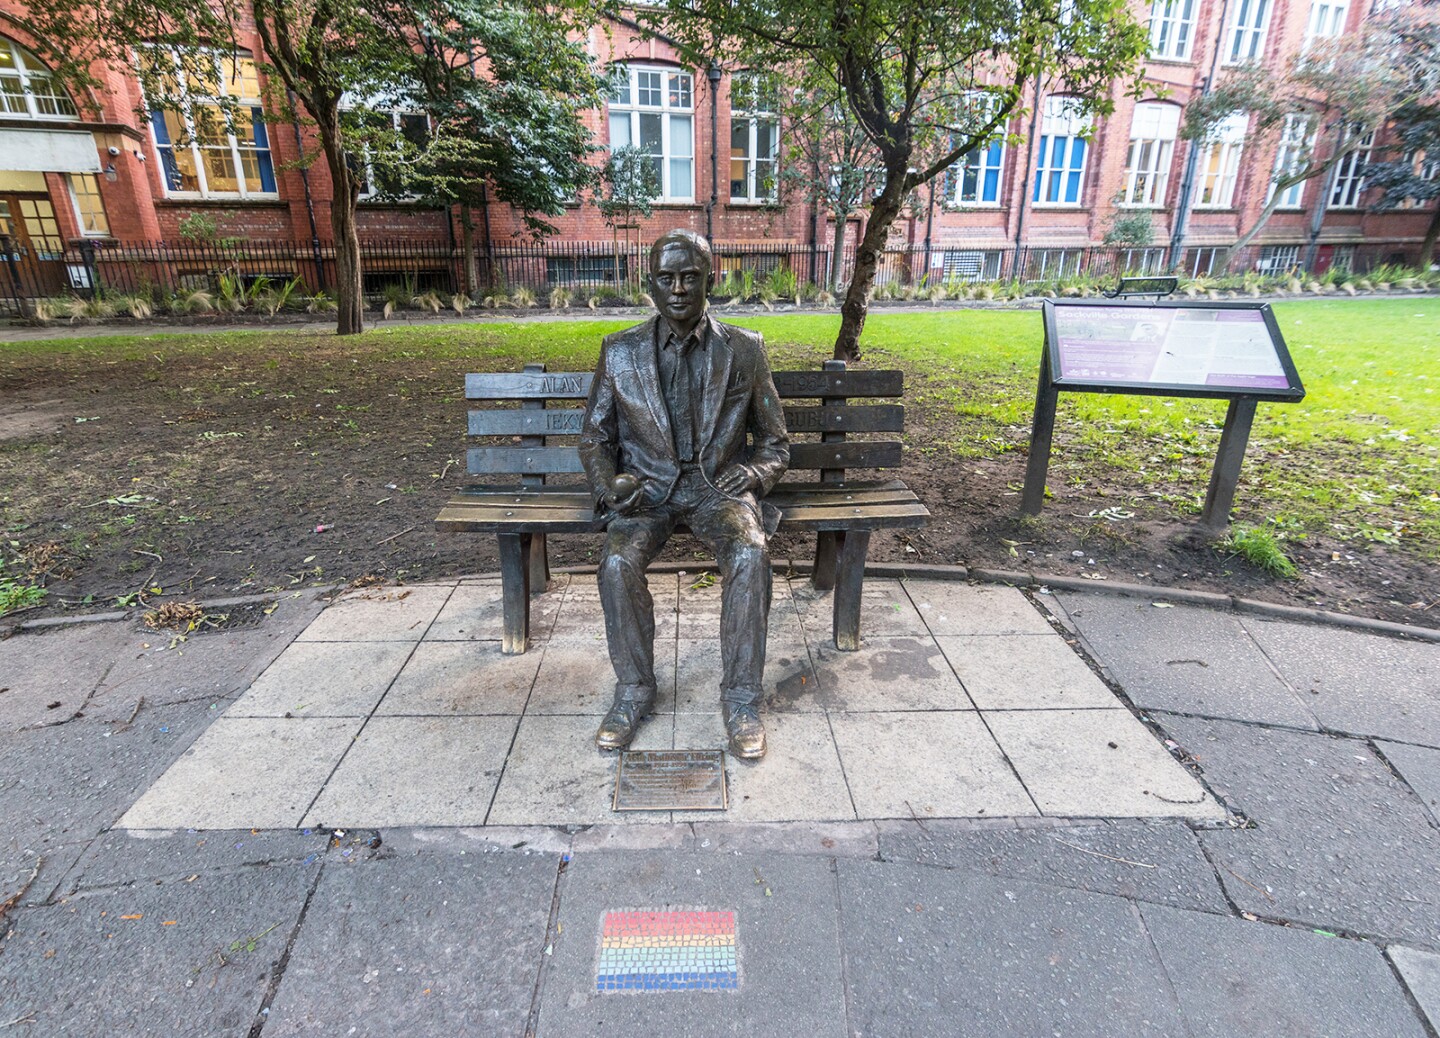 <h2><b>Alan Turing Memorial </b></h2> <h3>Manchester, England</h3> <p> In the middle of <a class="Link" href="https://www.afar.com/magazine/the-best-things-to-do-in-manchester-england" rel="noopener">Manchester’s</a> Sackville Park, a bronze representation of Alan Turing sits patiently on a bench, apple in hand—a reference perhaps to the tree of knowledge and his method of suicide, a cyanide-laced apple. The plaque at his feet reads: “Father of computer science, mathematician, logician, wartime codebreaker, victim of prejudice.” The 20th-century Englishman—whom many learned about when Benedict Cumberbatch portrayed him in 2014’s <i>The Imitation Game</i>—was prosecuted and chemically castrated for homosexual acts during the 1950s. Located near the city’s Gay Village district and the <a class="Link" href="https://www.beacon-of-hope.org.uk/about" rel="noopener">Beacon of Hope</a> HIV/AIDS memorial, the statue was erected in 2001, though it gained greater fame after Queen Elizabeth II posthumously pardoned Turing in 2013. The commemorative statue in Turing’s honor is part of Manchester’s LGBTQ Heritage Trail, also called the <a class="Link" href="https://www.visitmanchester.com/things-to-see-and-do/manchester-heritage-trail-p326171" rel="noopener">Out in the Past Trail</a>, for which small rainbow mosaics are set into the pavement to mark key historic sites.</p>